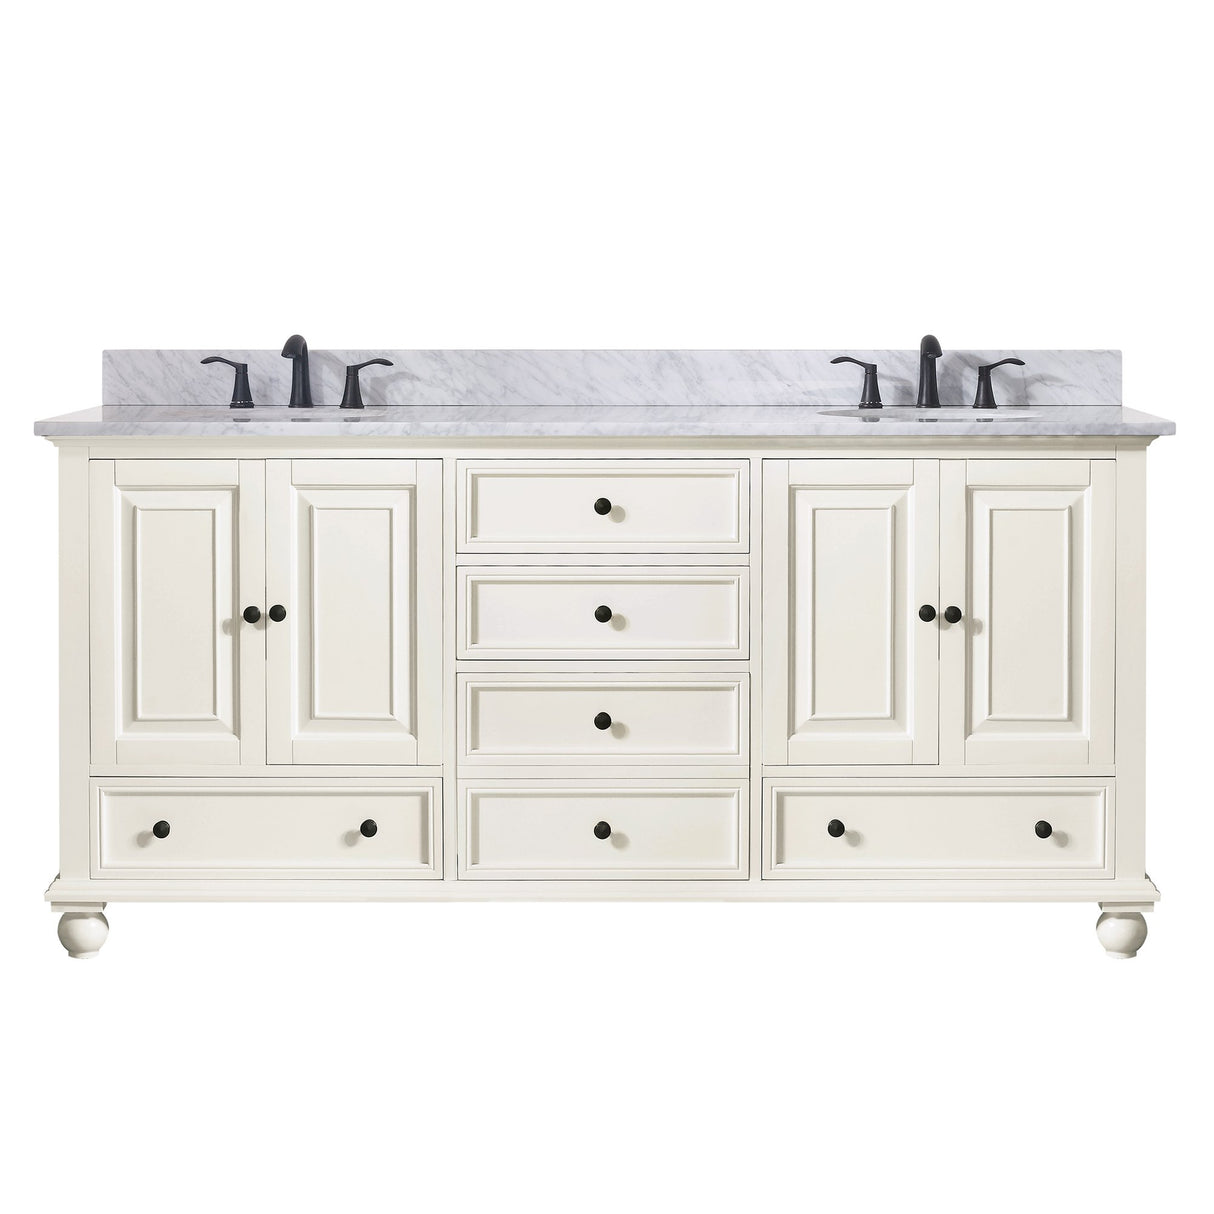 Avanity Thompson 73 in. Double Vanity in French White finish with Carrara White Marble Top